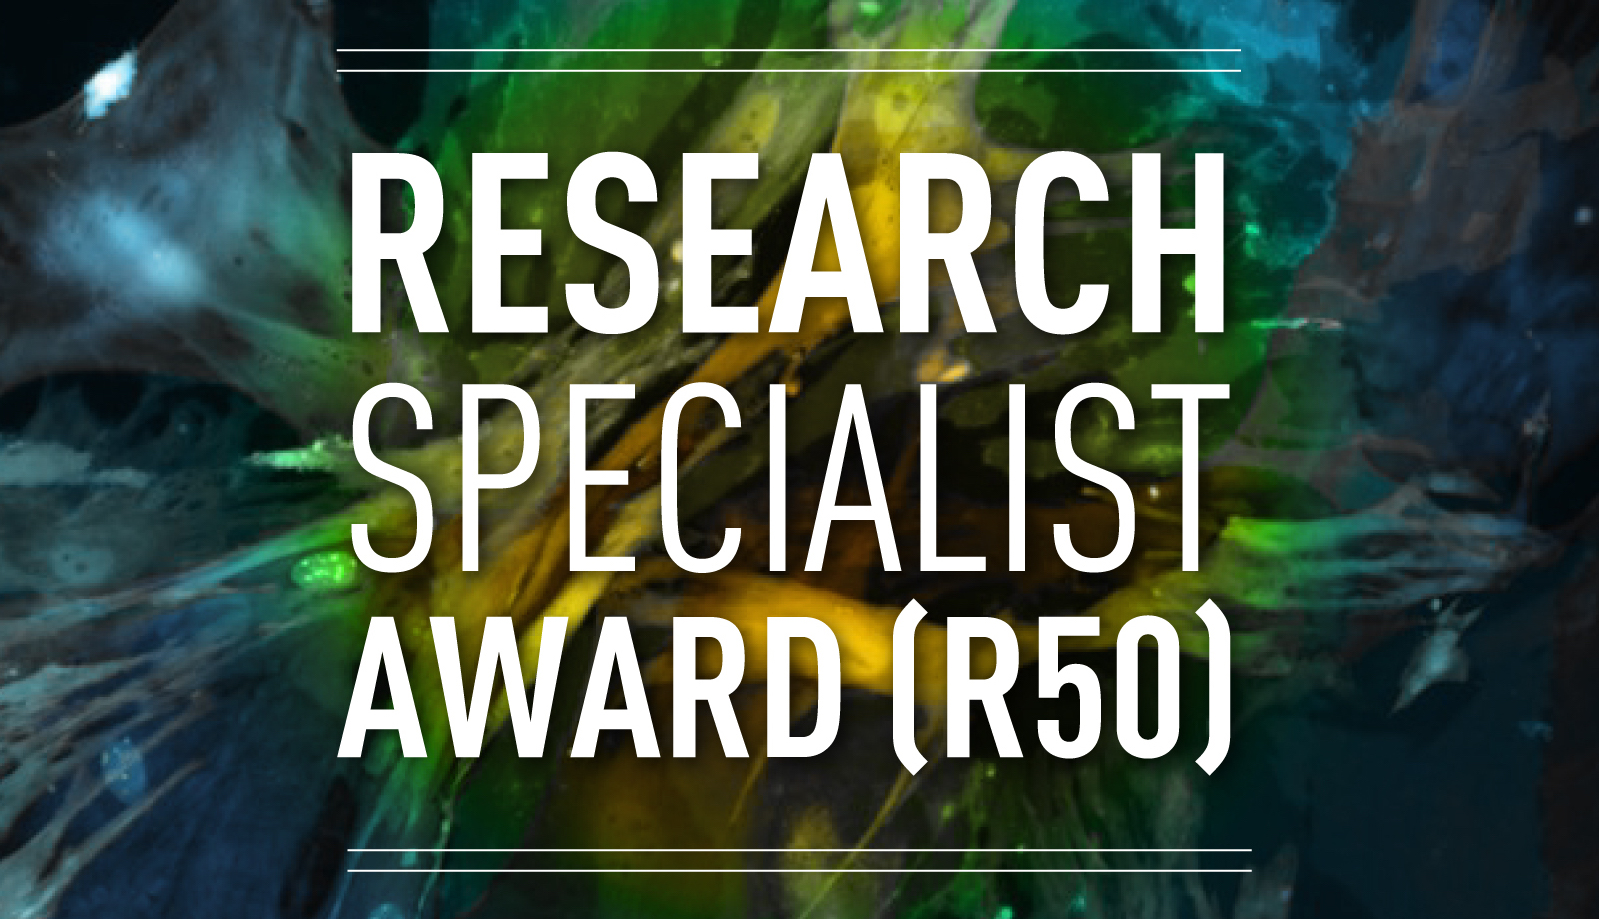 Research Specialist Award (R50)